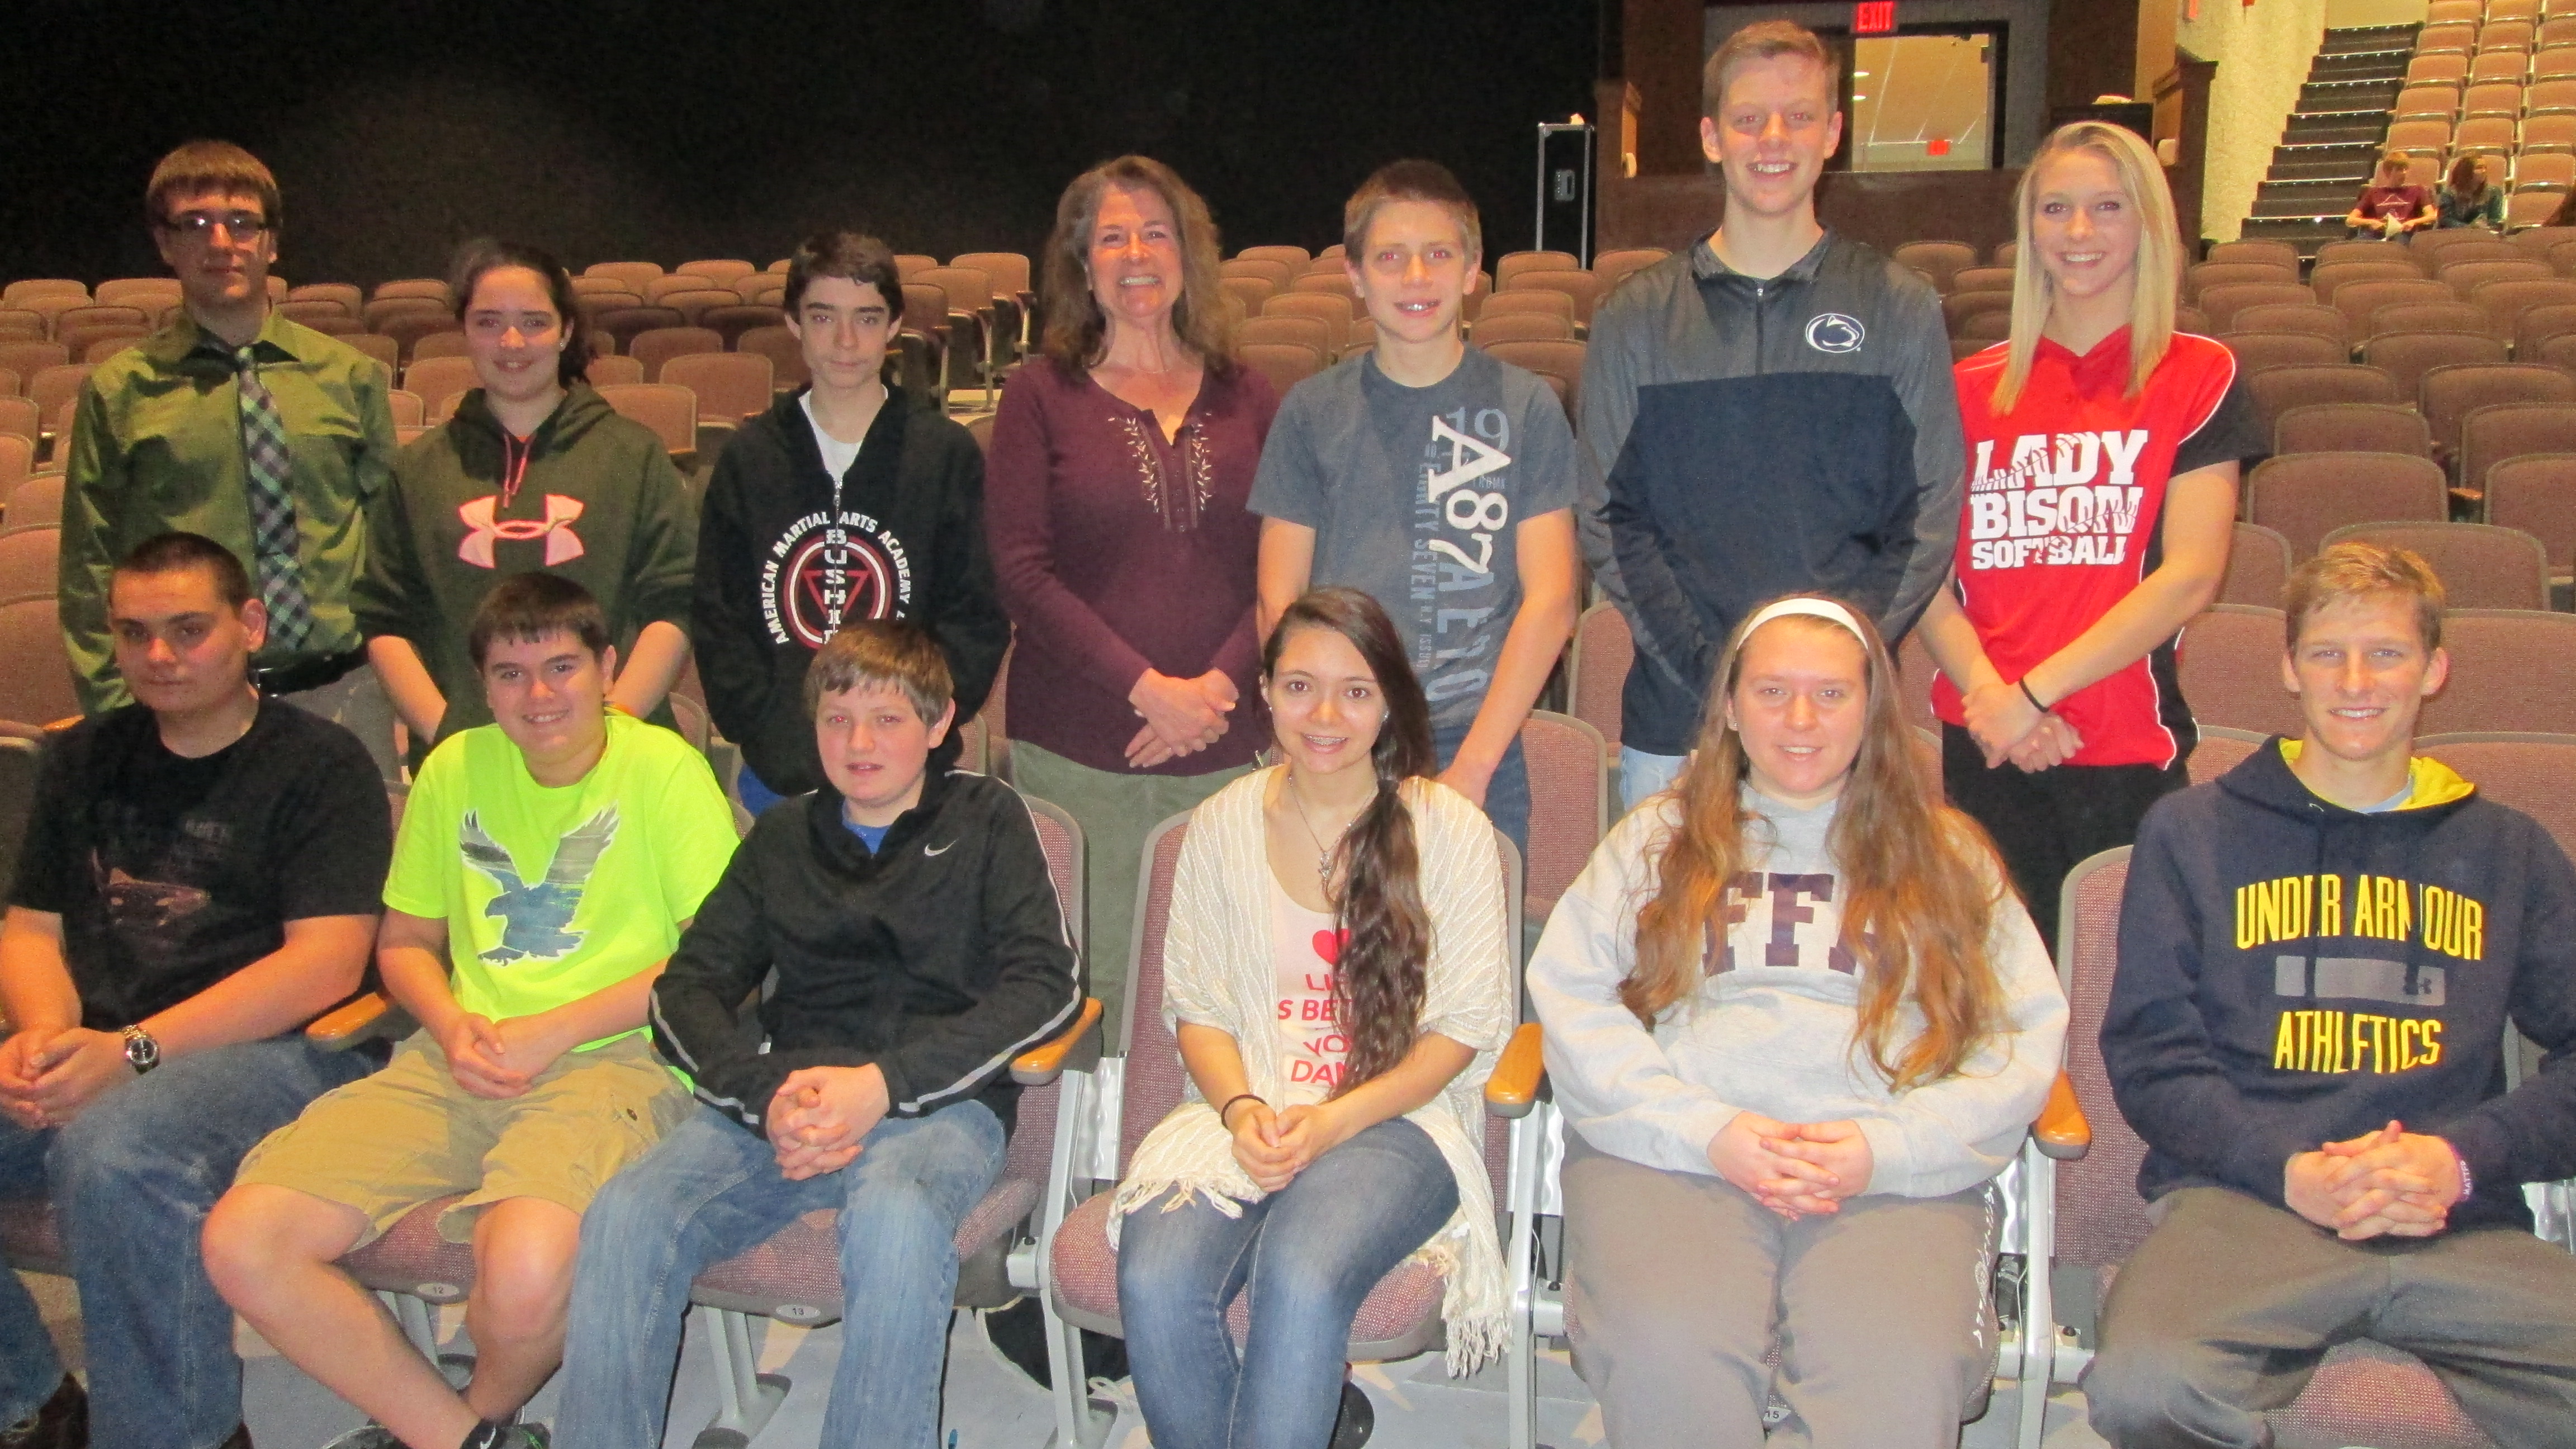 Participants in the national math competition held at Clearfield
are, from left: back row: Josh Anstead, Katlyne Fye, Herschel
Johnson, Teacher Judi Bookhamer, Elliot Thorp, Caleb Strouse and Alana
Kochan. In front row are: Matt Rowles, Zach Owens, Devin Carns,
Diane Thompson, Sarah Hazel and Kerry Maines. Missing from
the photo are: Thad Butler, Sarah Snyder, Ashley Struble, Sabrina
Wimer, Sierra Luzier and Macy Forrest. (Provided photo)